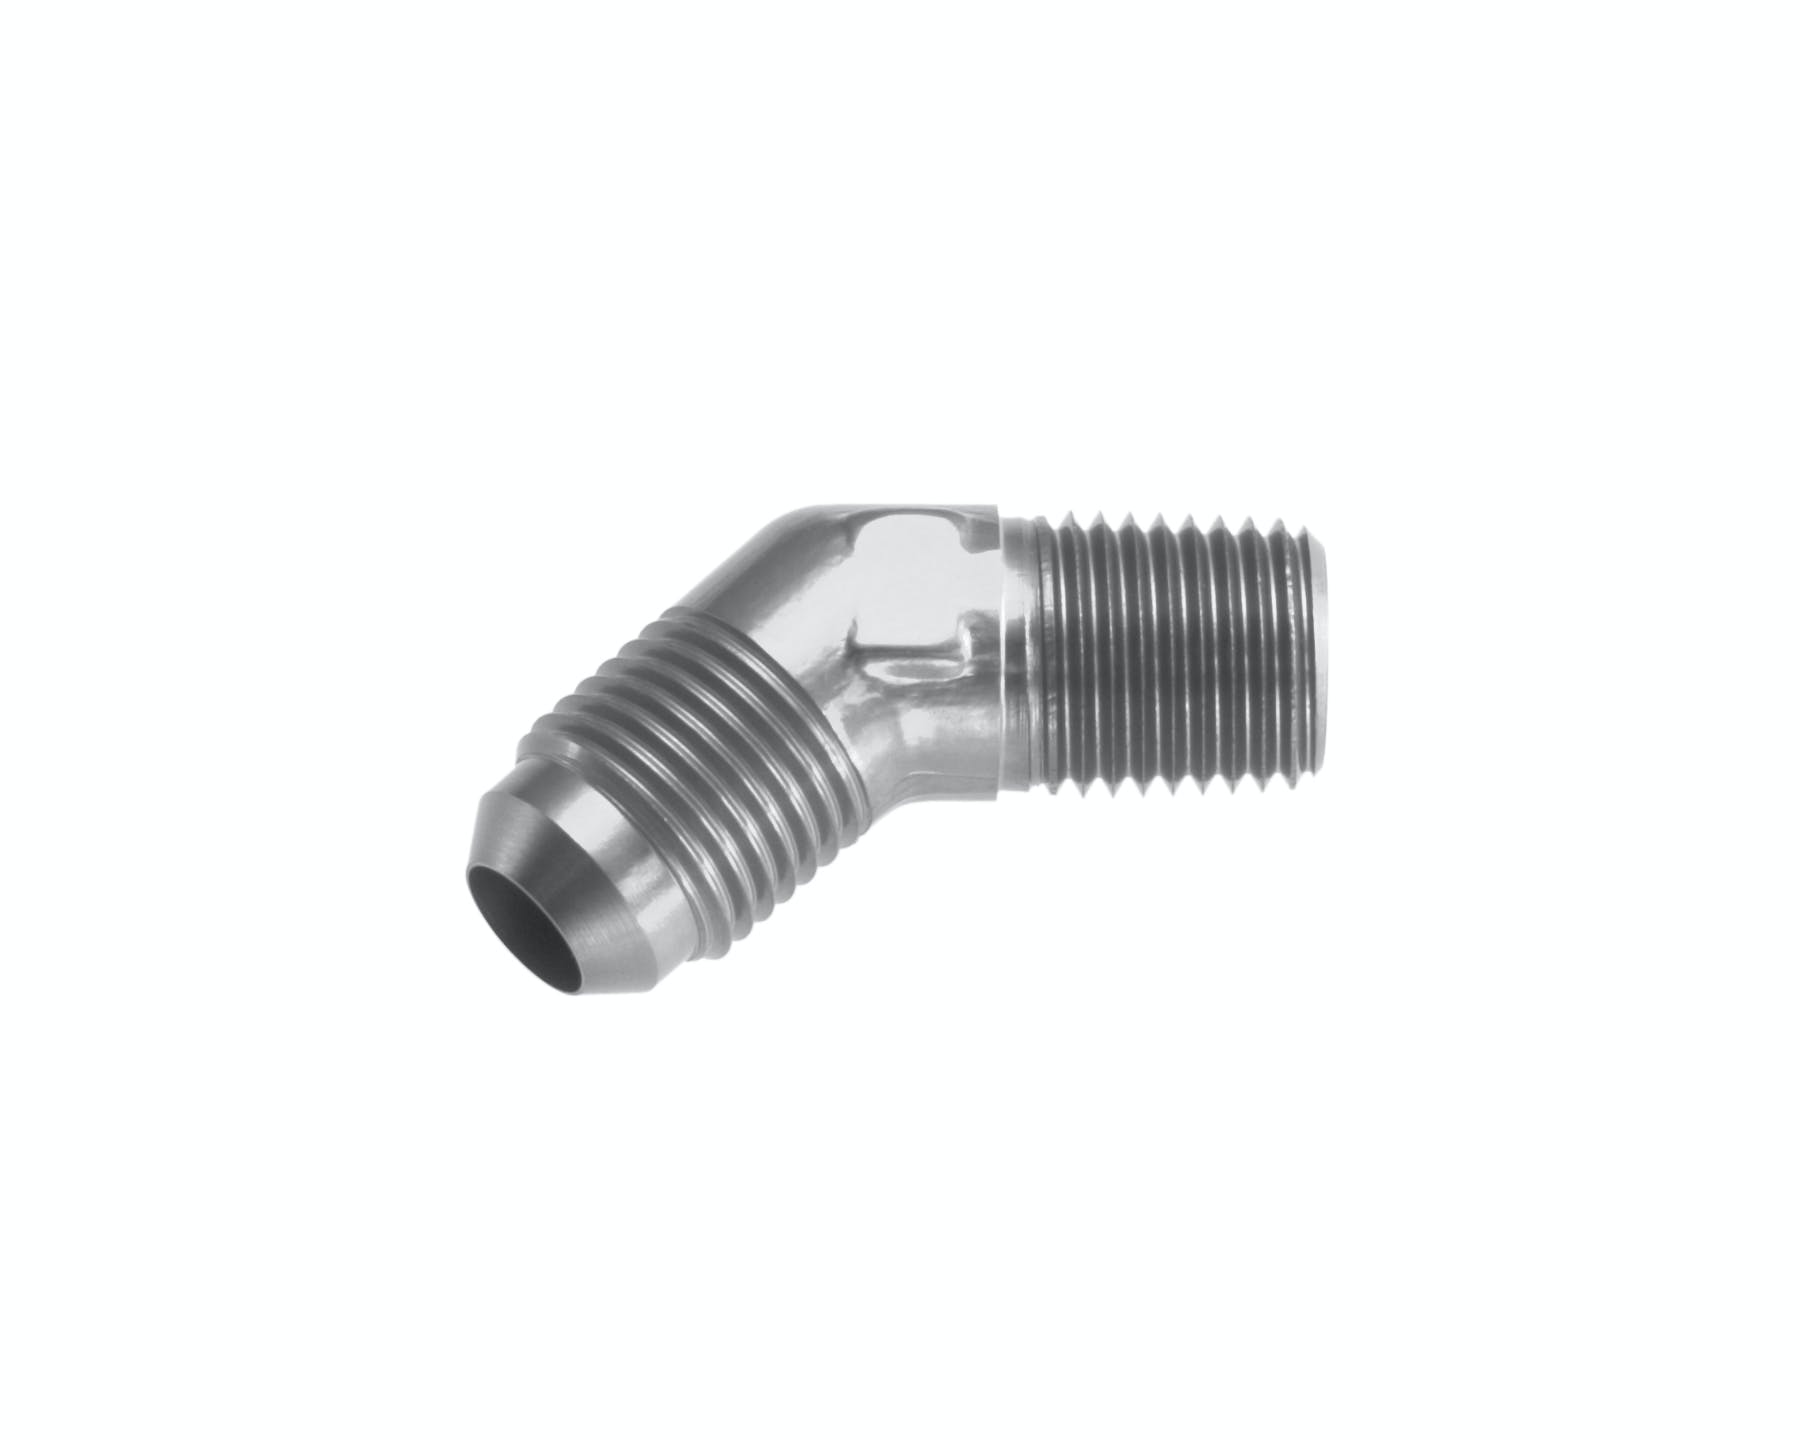 Redhorse Performance 823-08-04-5 -08 45 degree Male adapter to -04 (1/4in) NPT Male - clear